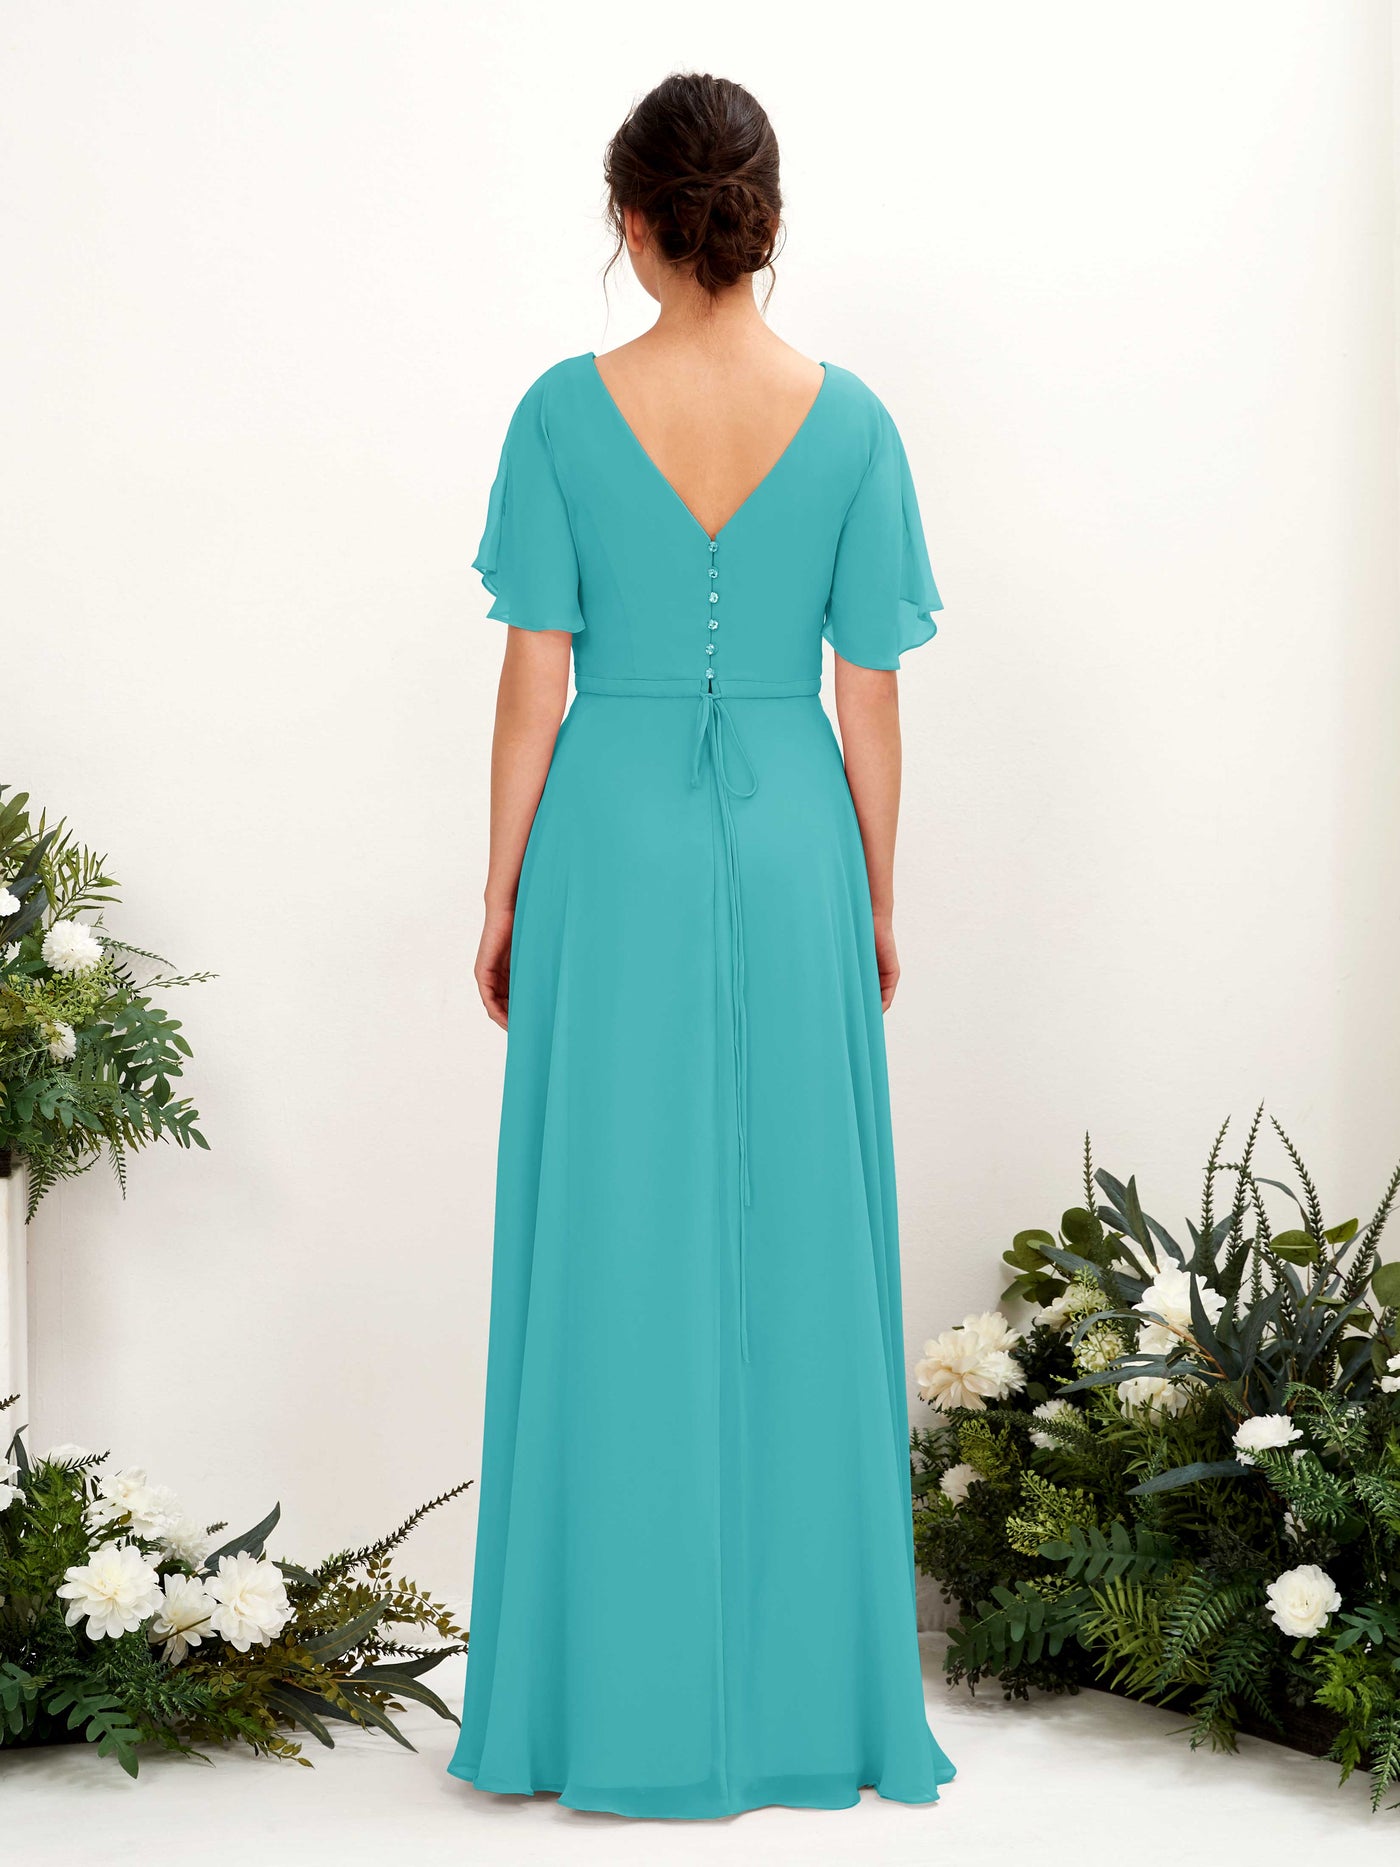 Turquoise Bridesmaid Dresses Bridesmaid Dress A-line Chiffon V-neck Full Length Short Sleeves Wedding Party Dress (81224623)#color_turquoise